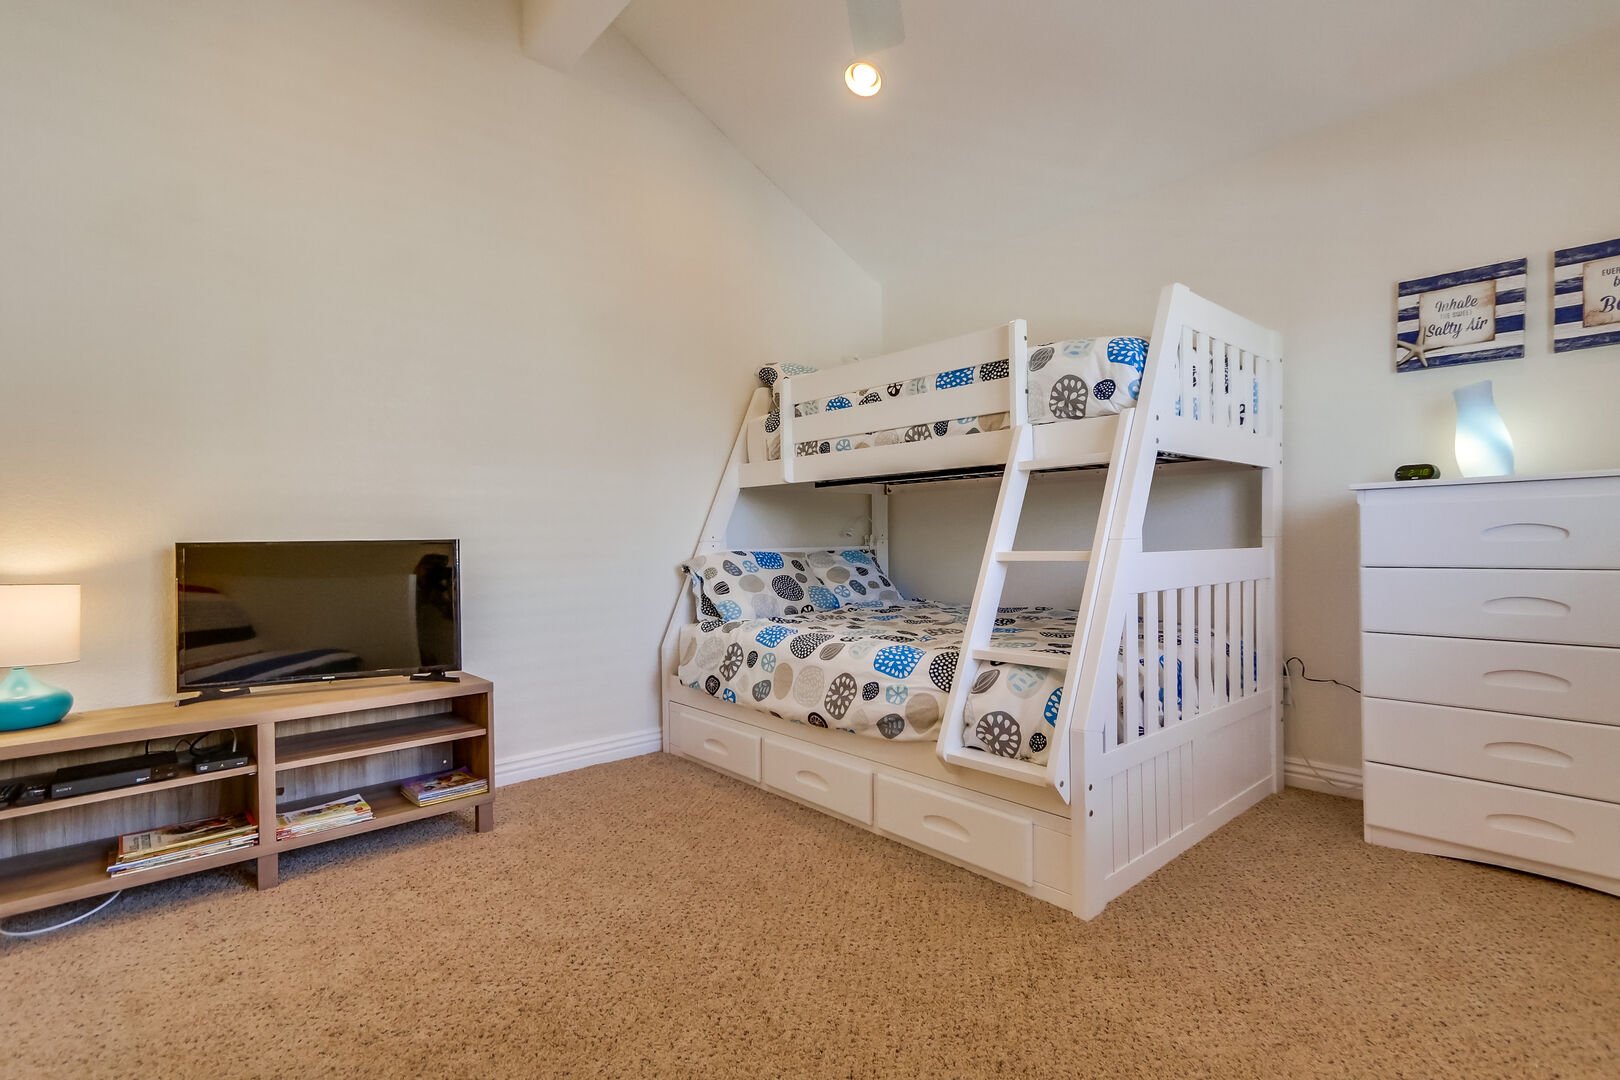 Bunk beds with 1 double size mattress on the bottom and 1 twin size mattress on the top, TV, recessed lighting, ceiling fan, and vaulted ceiling